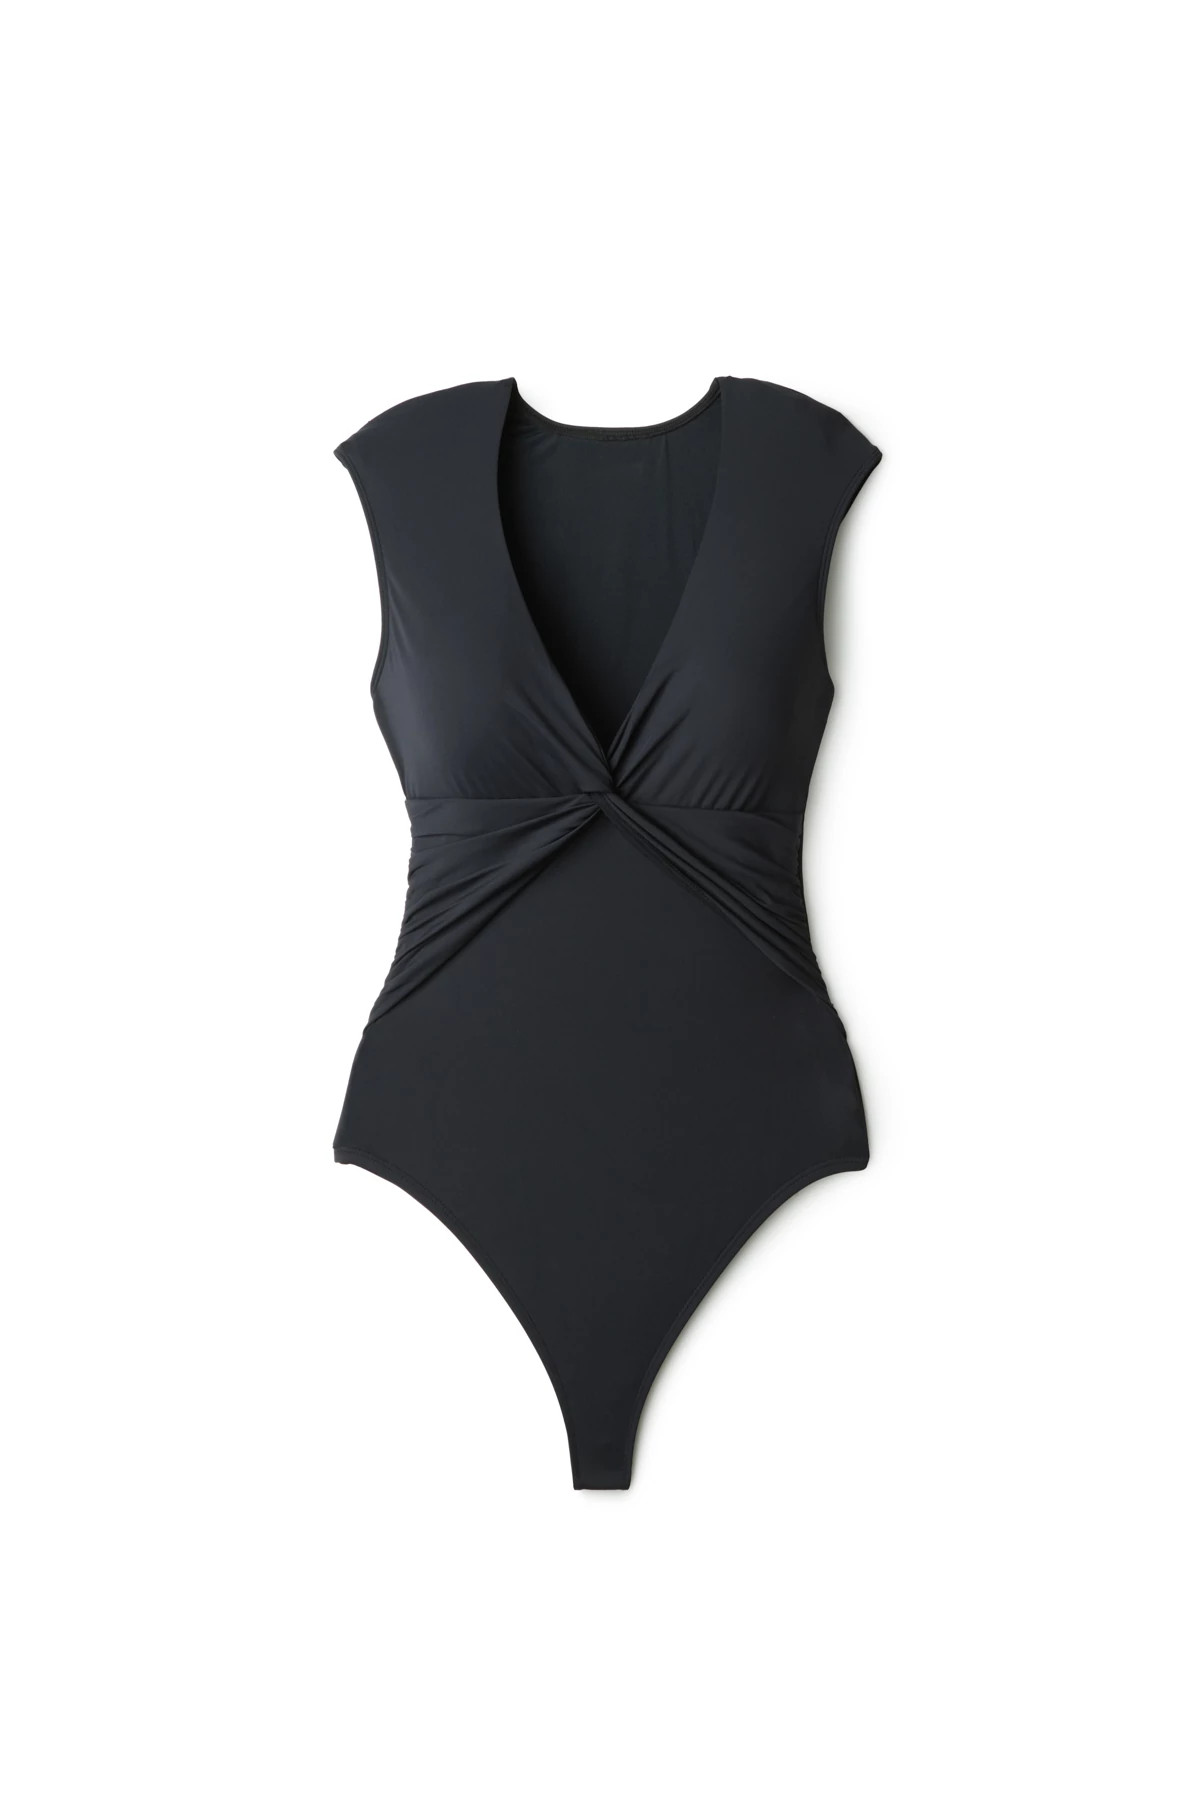 BLACK Cap Sleeve Plunge One Piece Swimsuit image number 3